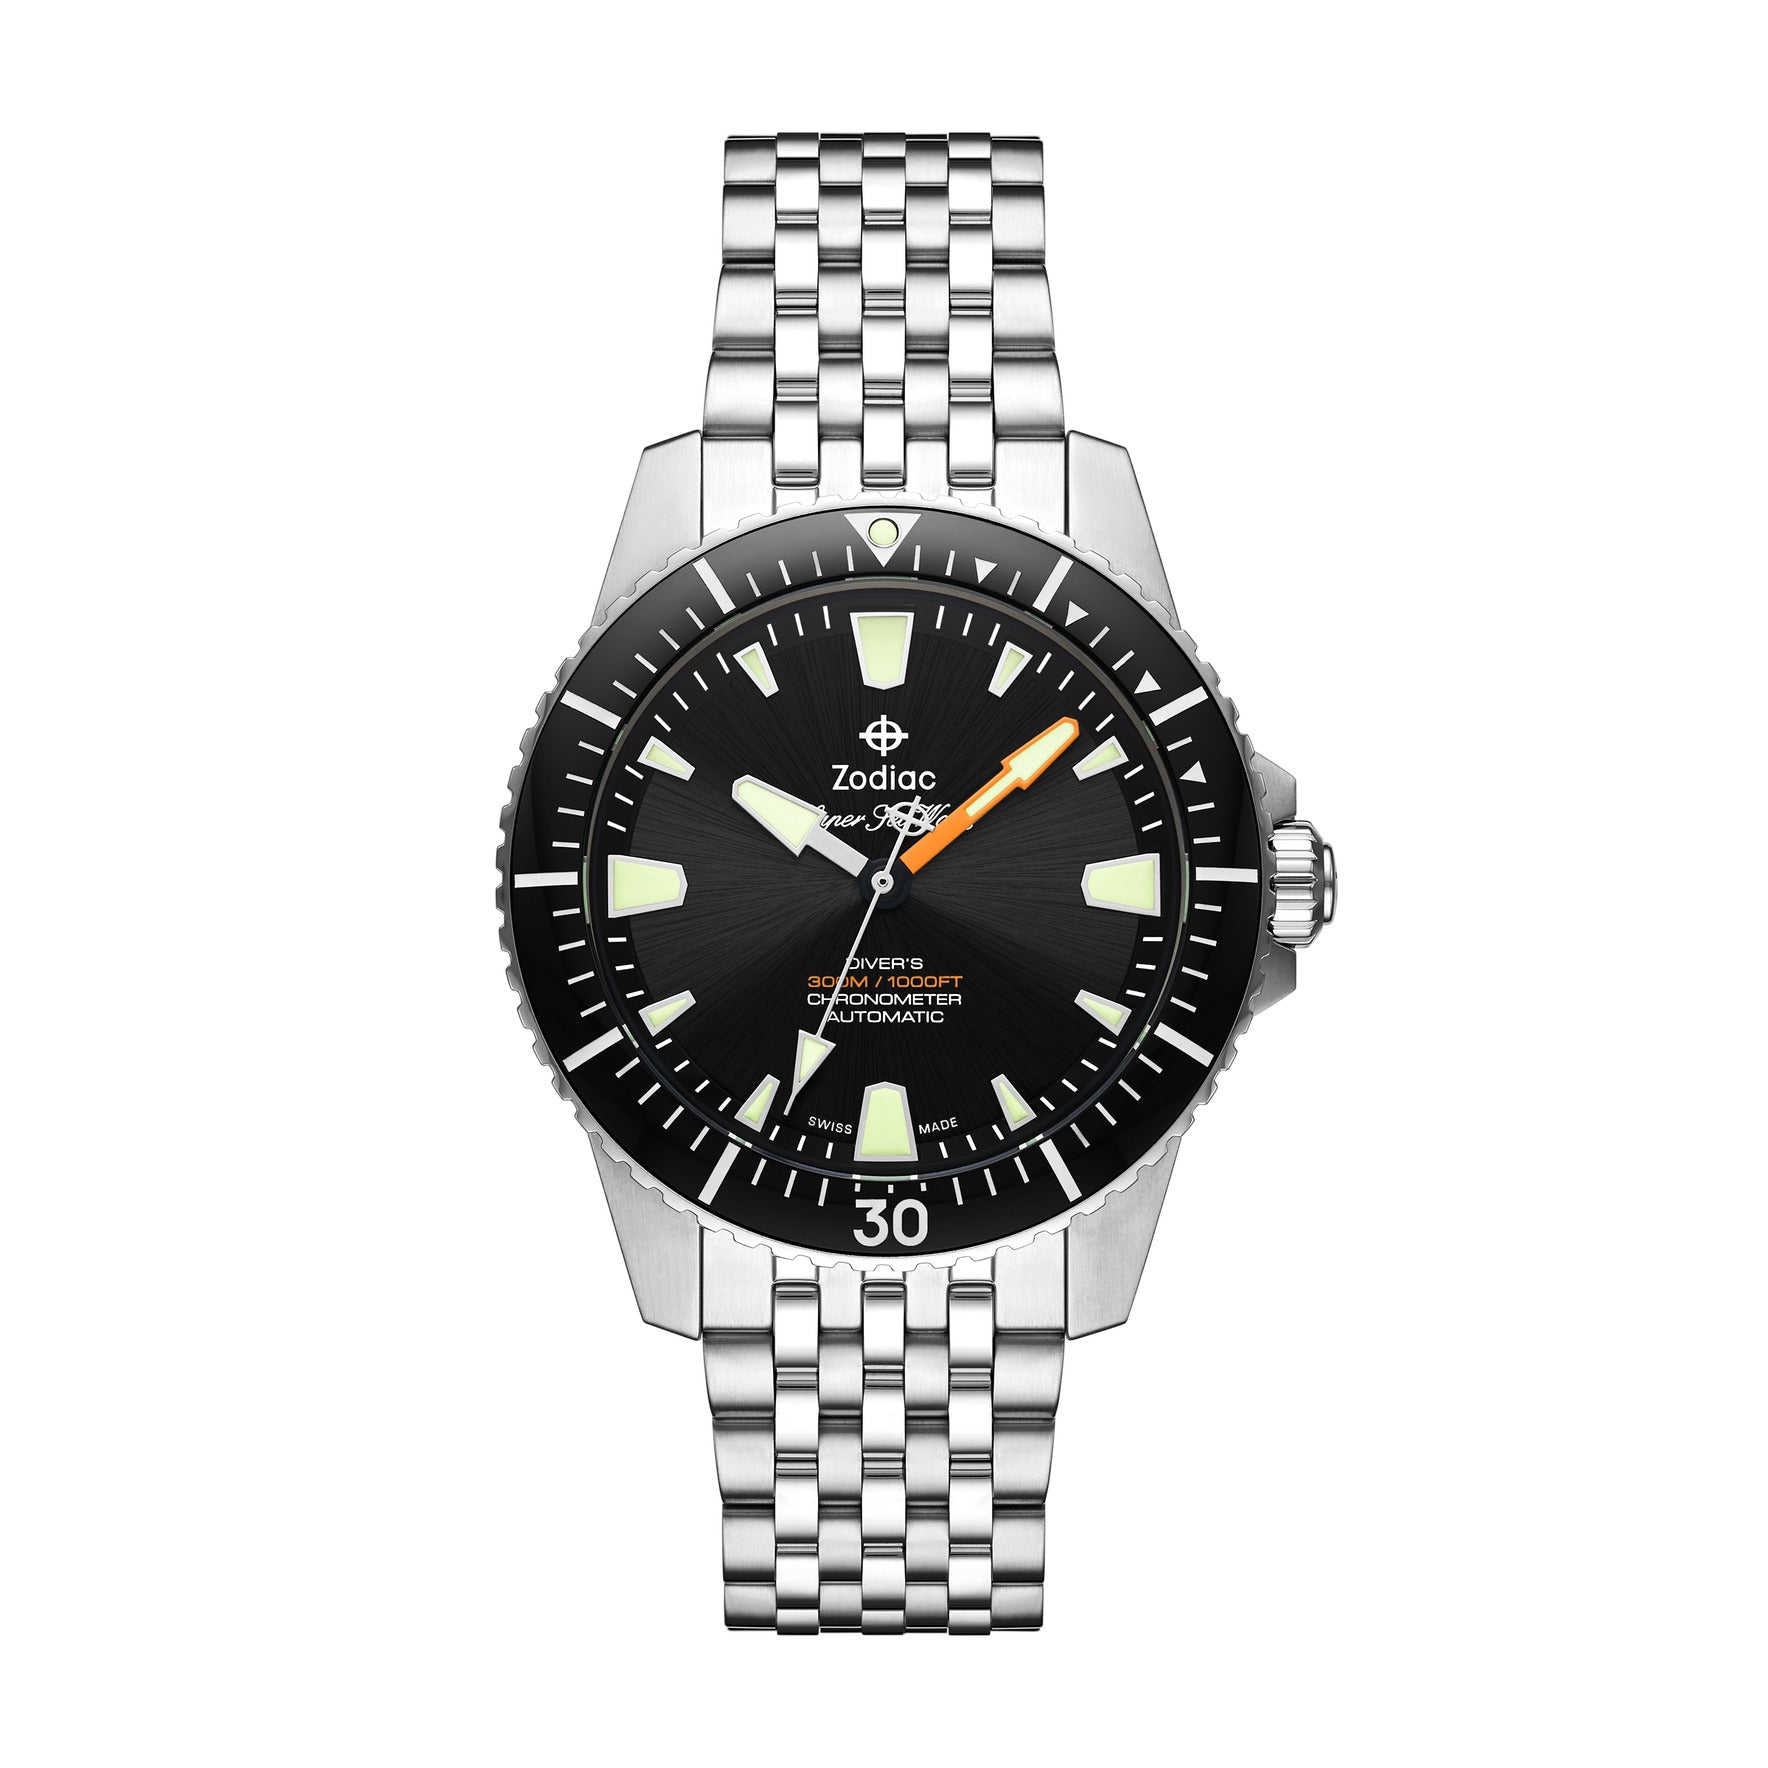 SUPER SEA WOLF PRO-DIVER AUTOMATIC STAINLESS STEEL WATCH